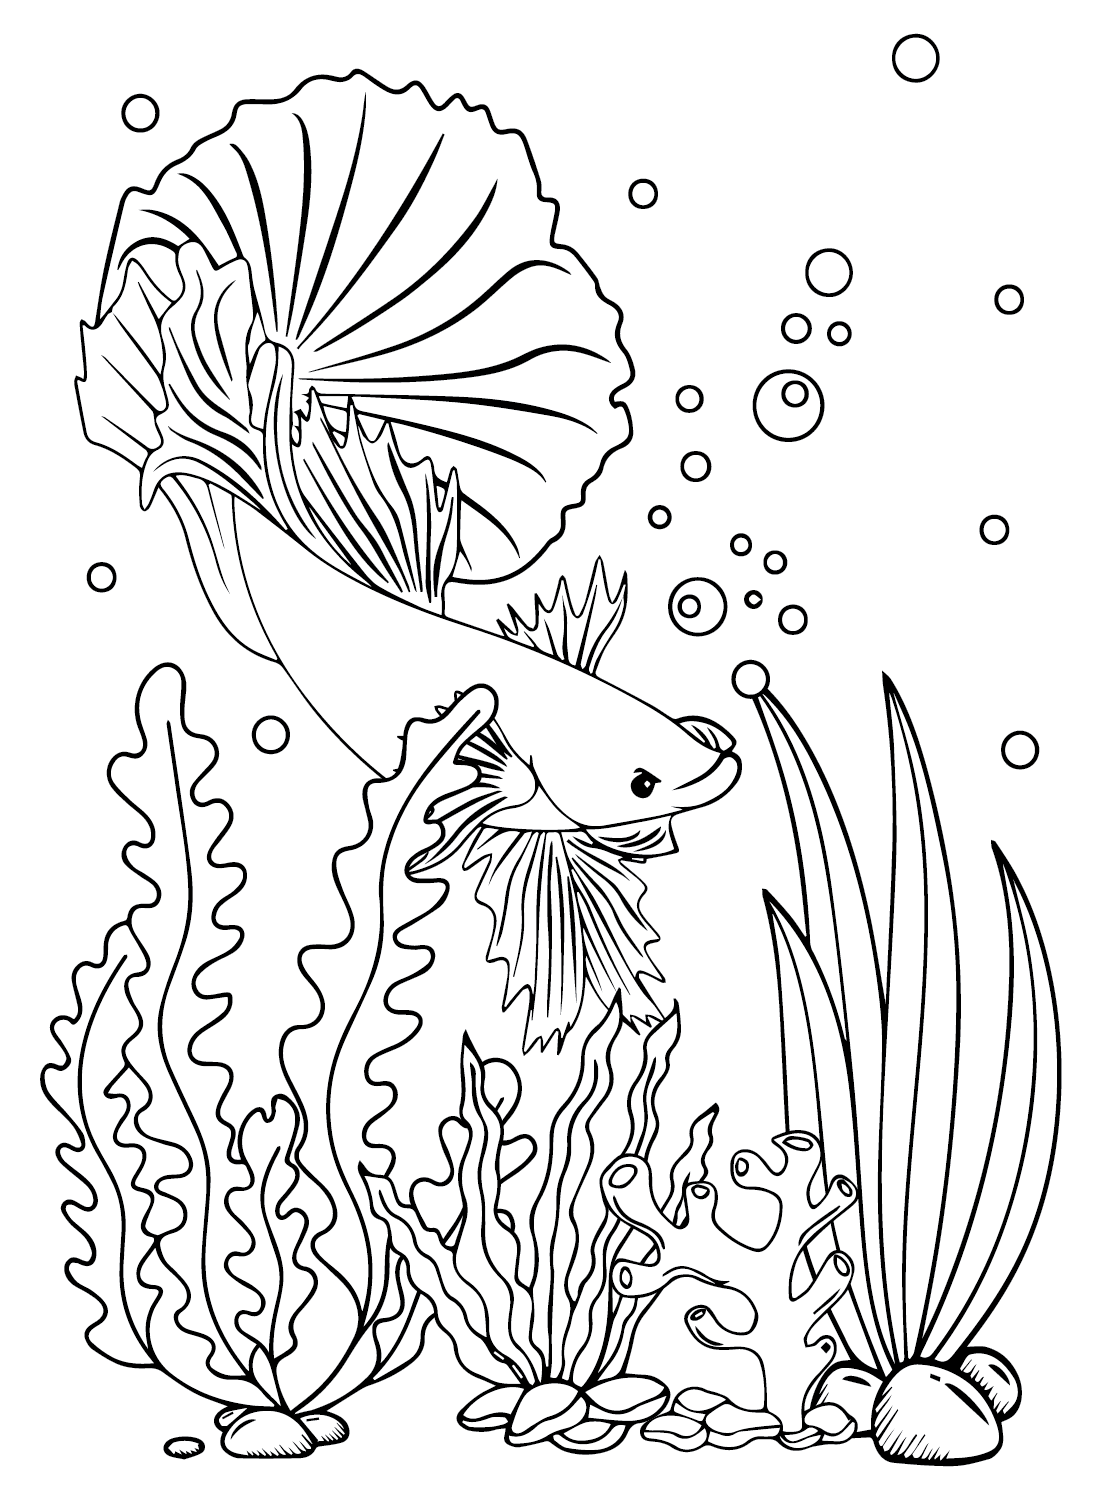 Betta Fish to Print Coloring Page - Free Printable Coloring Pages